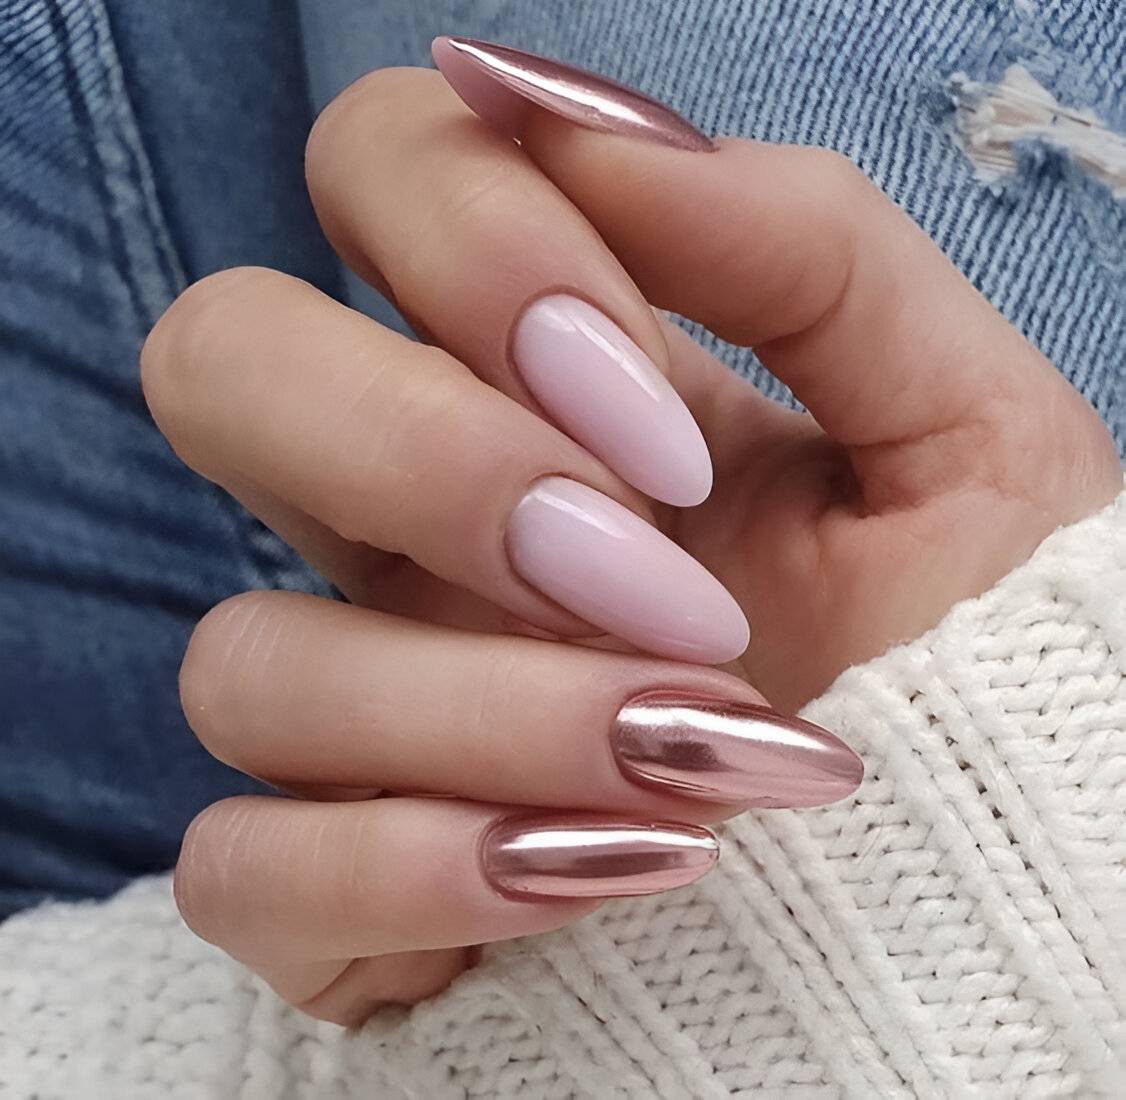 30 Chic Chrome Nail Designs For The Ultimate Glam Look - 223